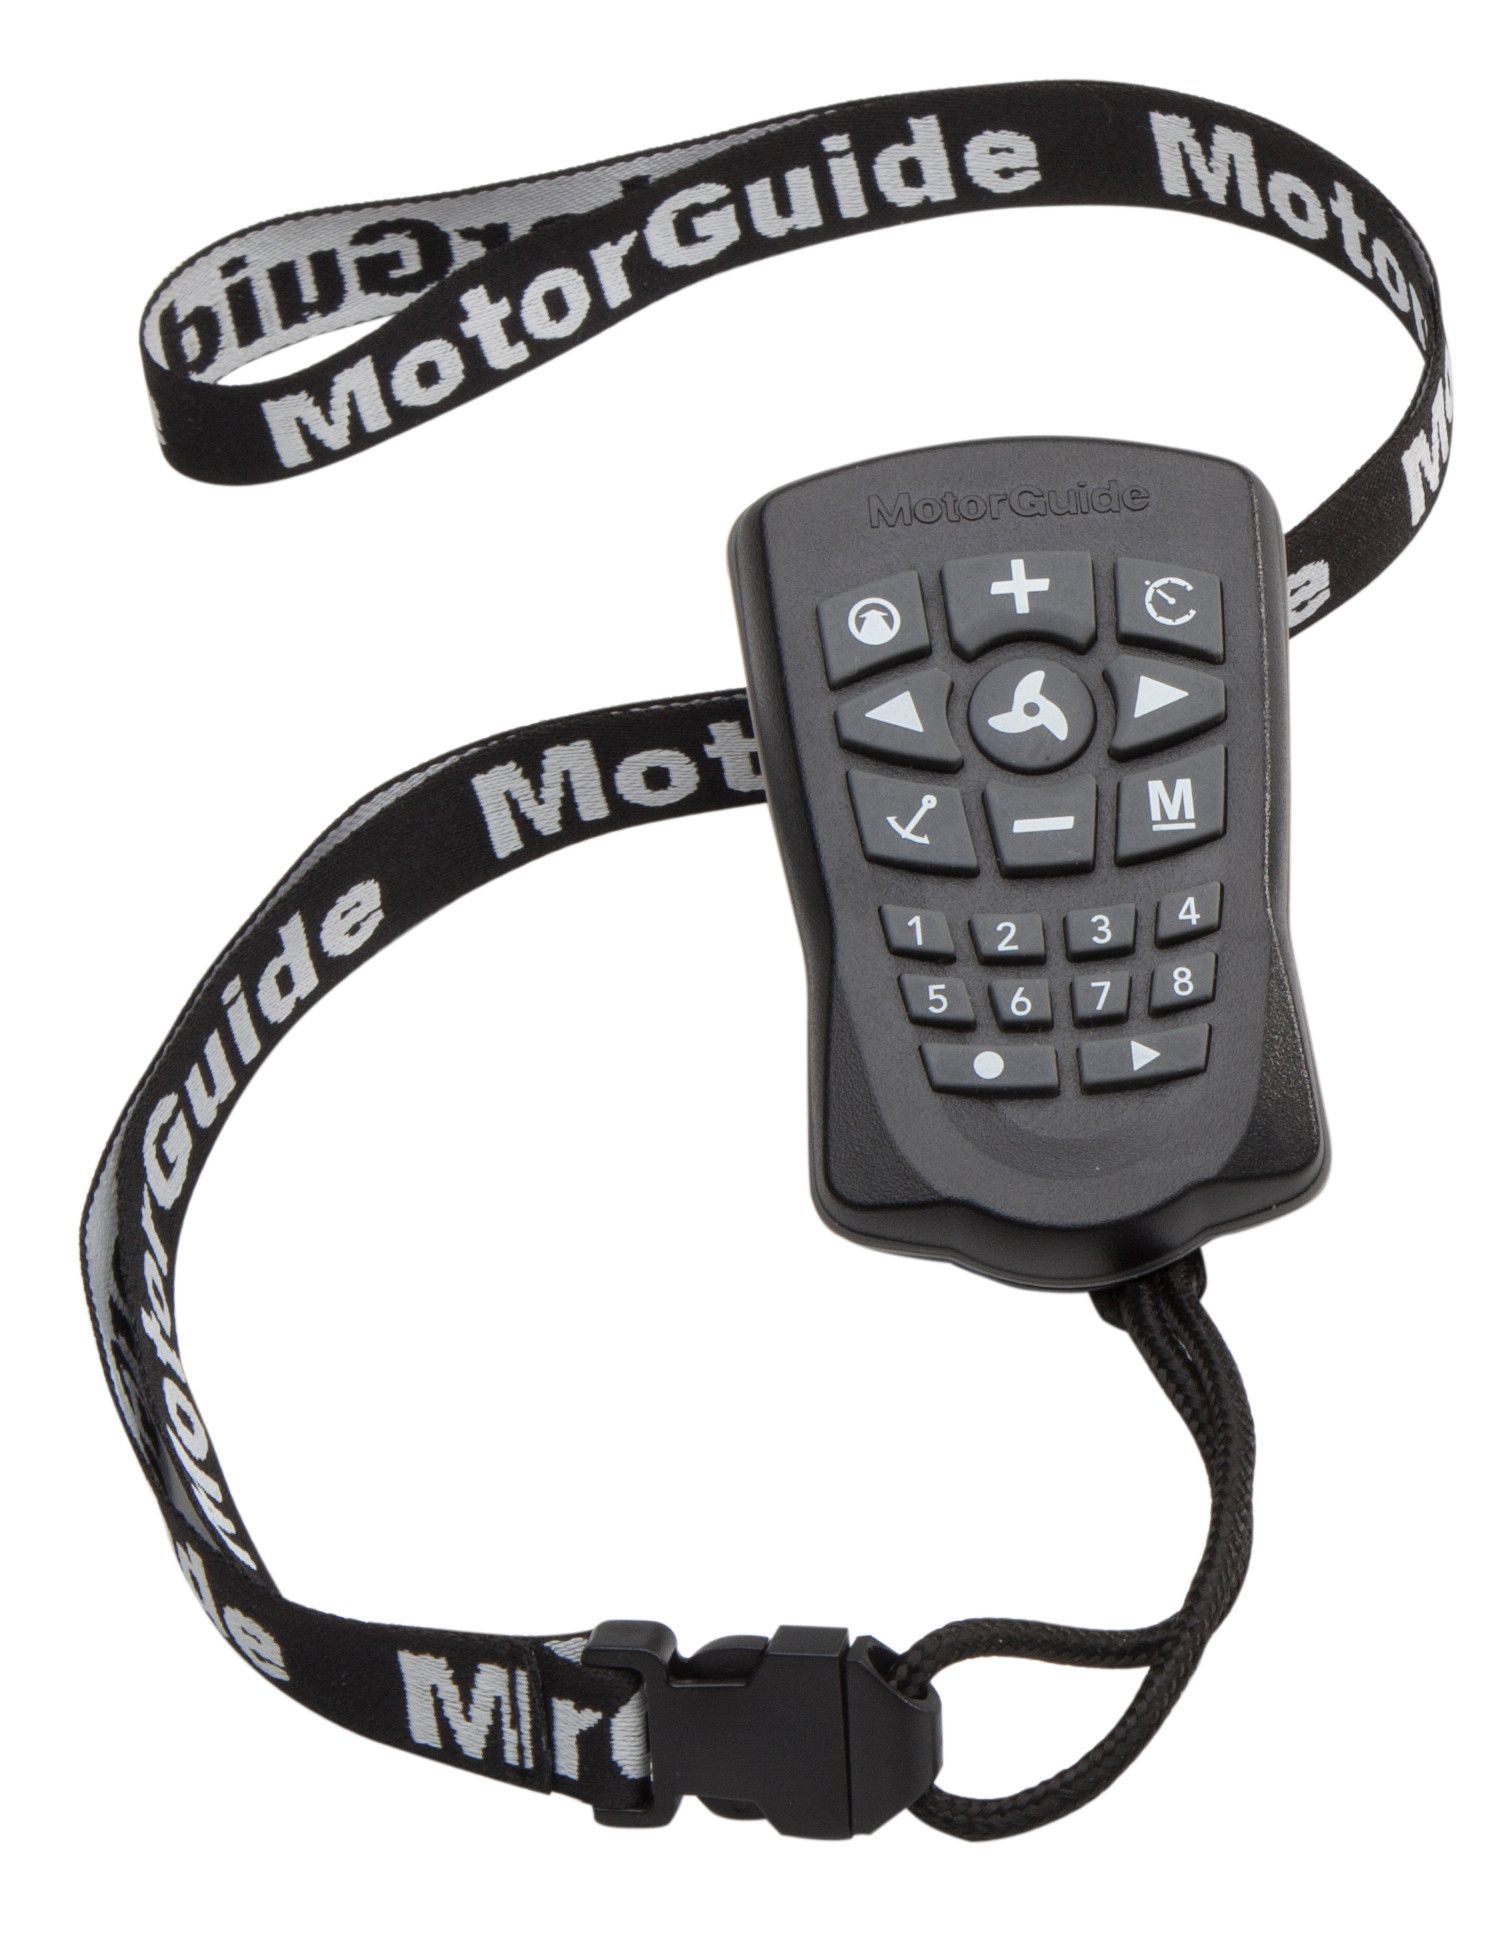 Motor-Guide Pinpoint GPS Remote